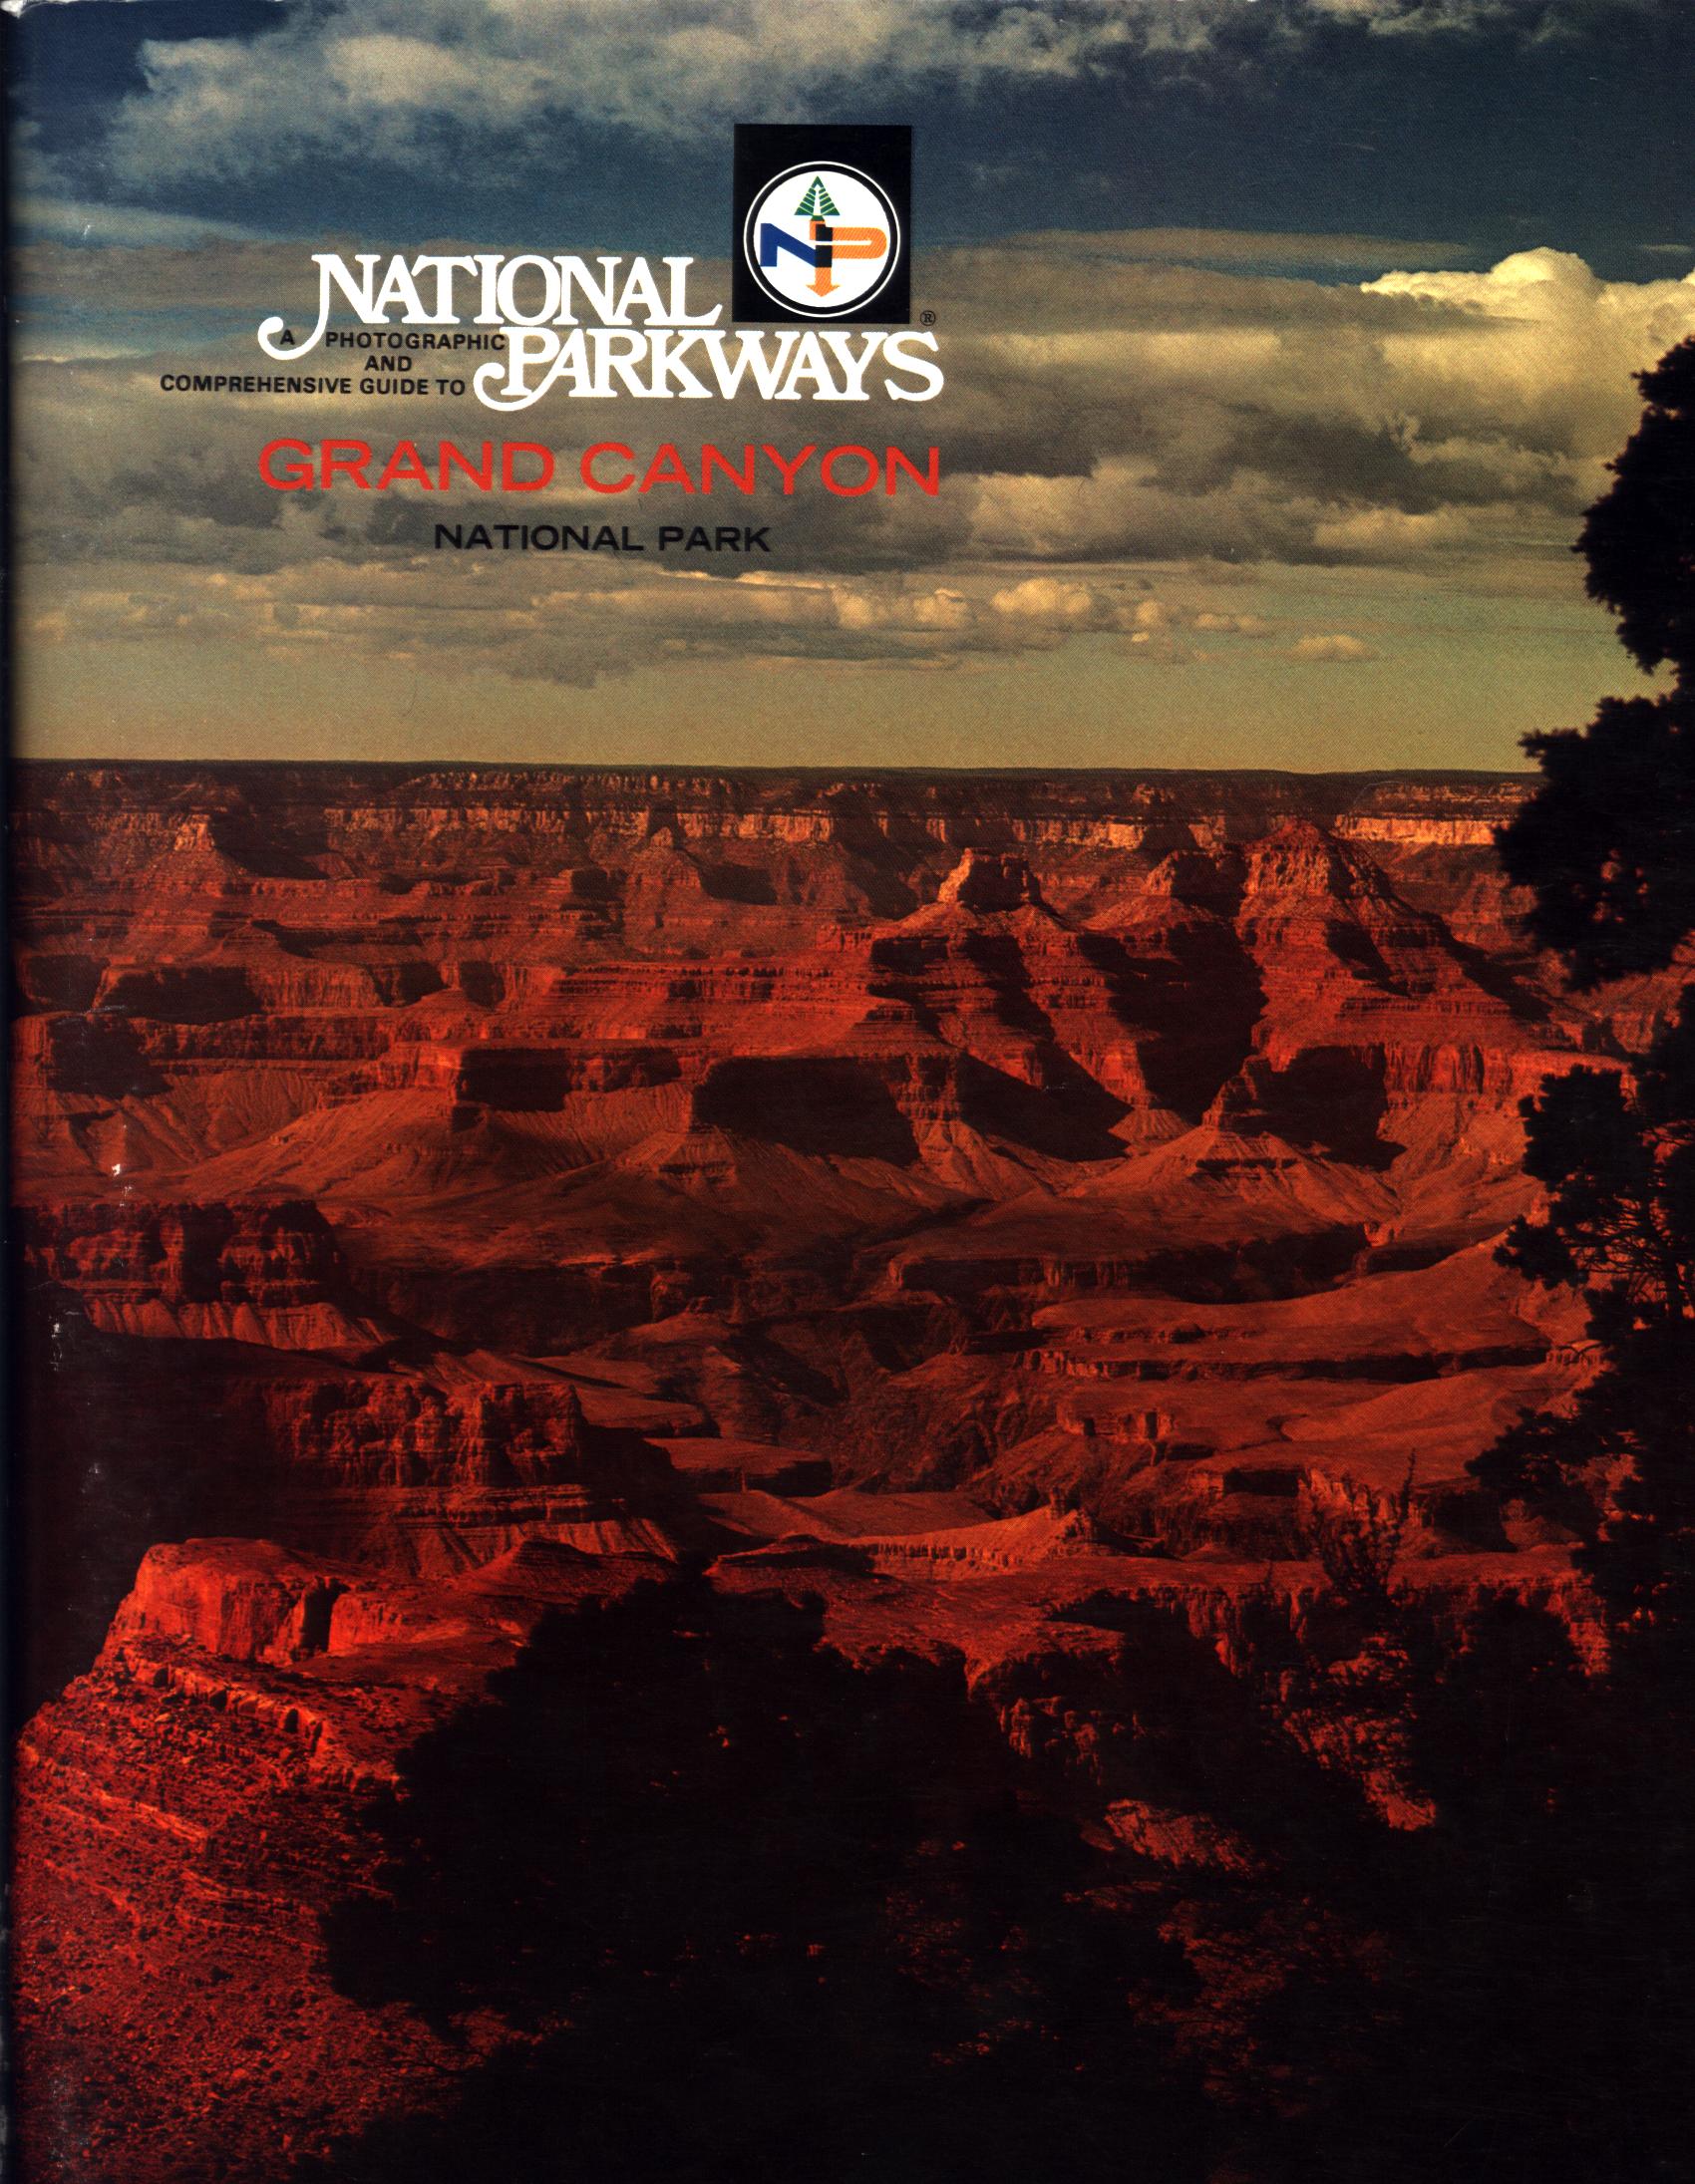 GRAND CANYON NATIONAL PARK--a photographic and comprehensive guide. 